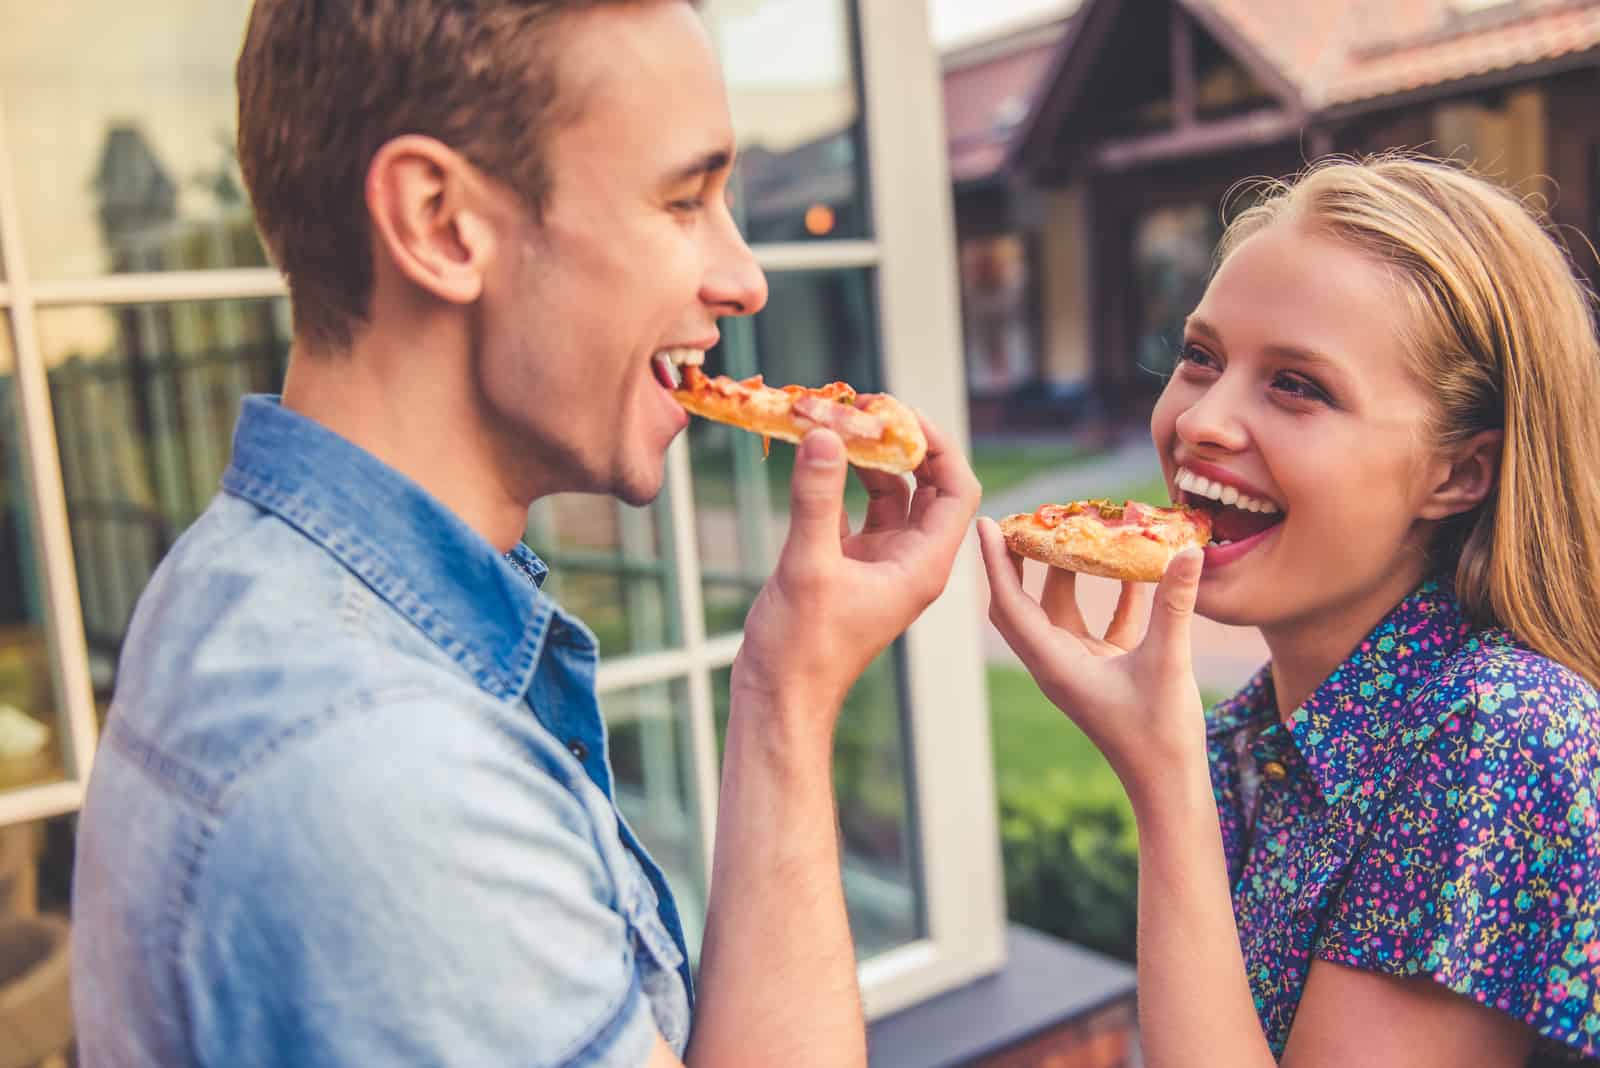 80+ Cheesiest Pizza Pick-Up Lines